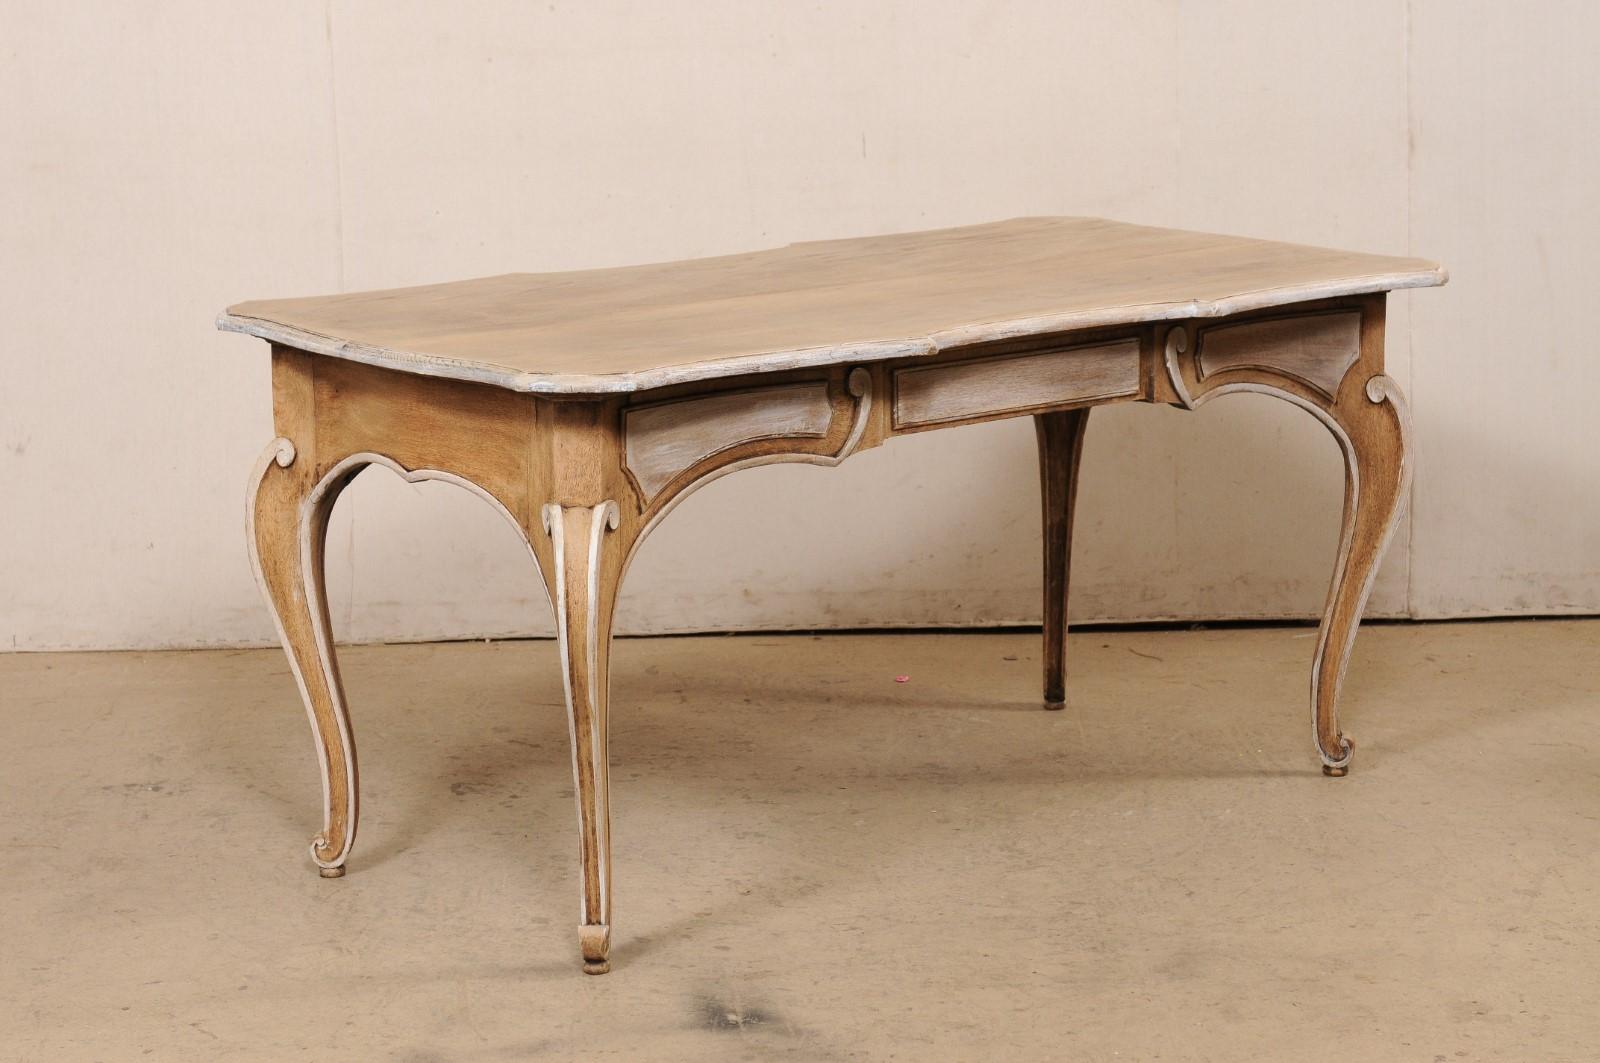 A Fabulous French 3-Drawer Desk w/Scallop-Carved Edge Top, Floatable 3